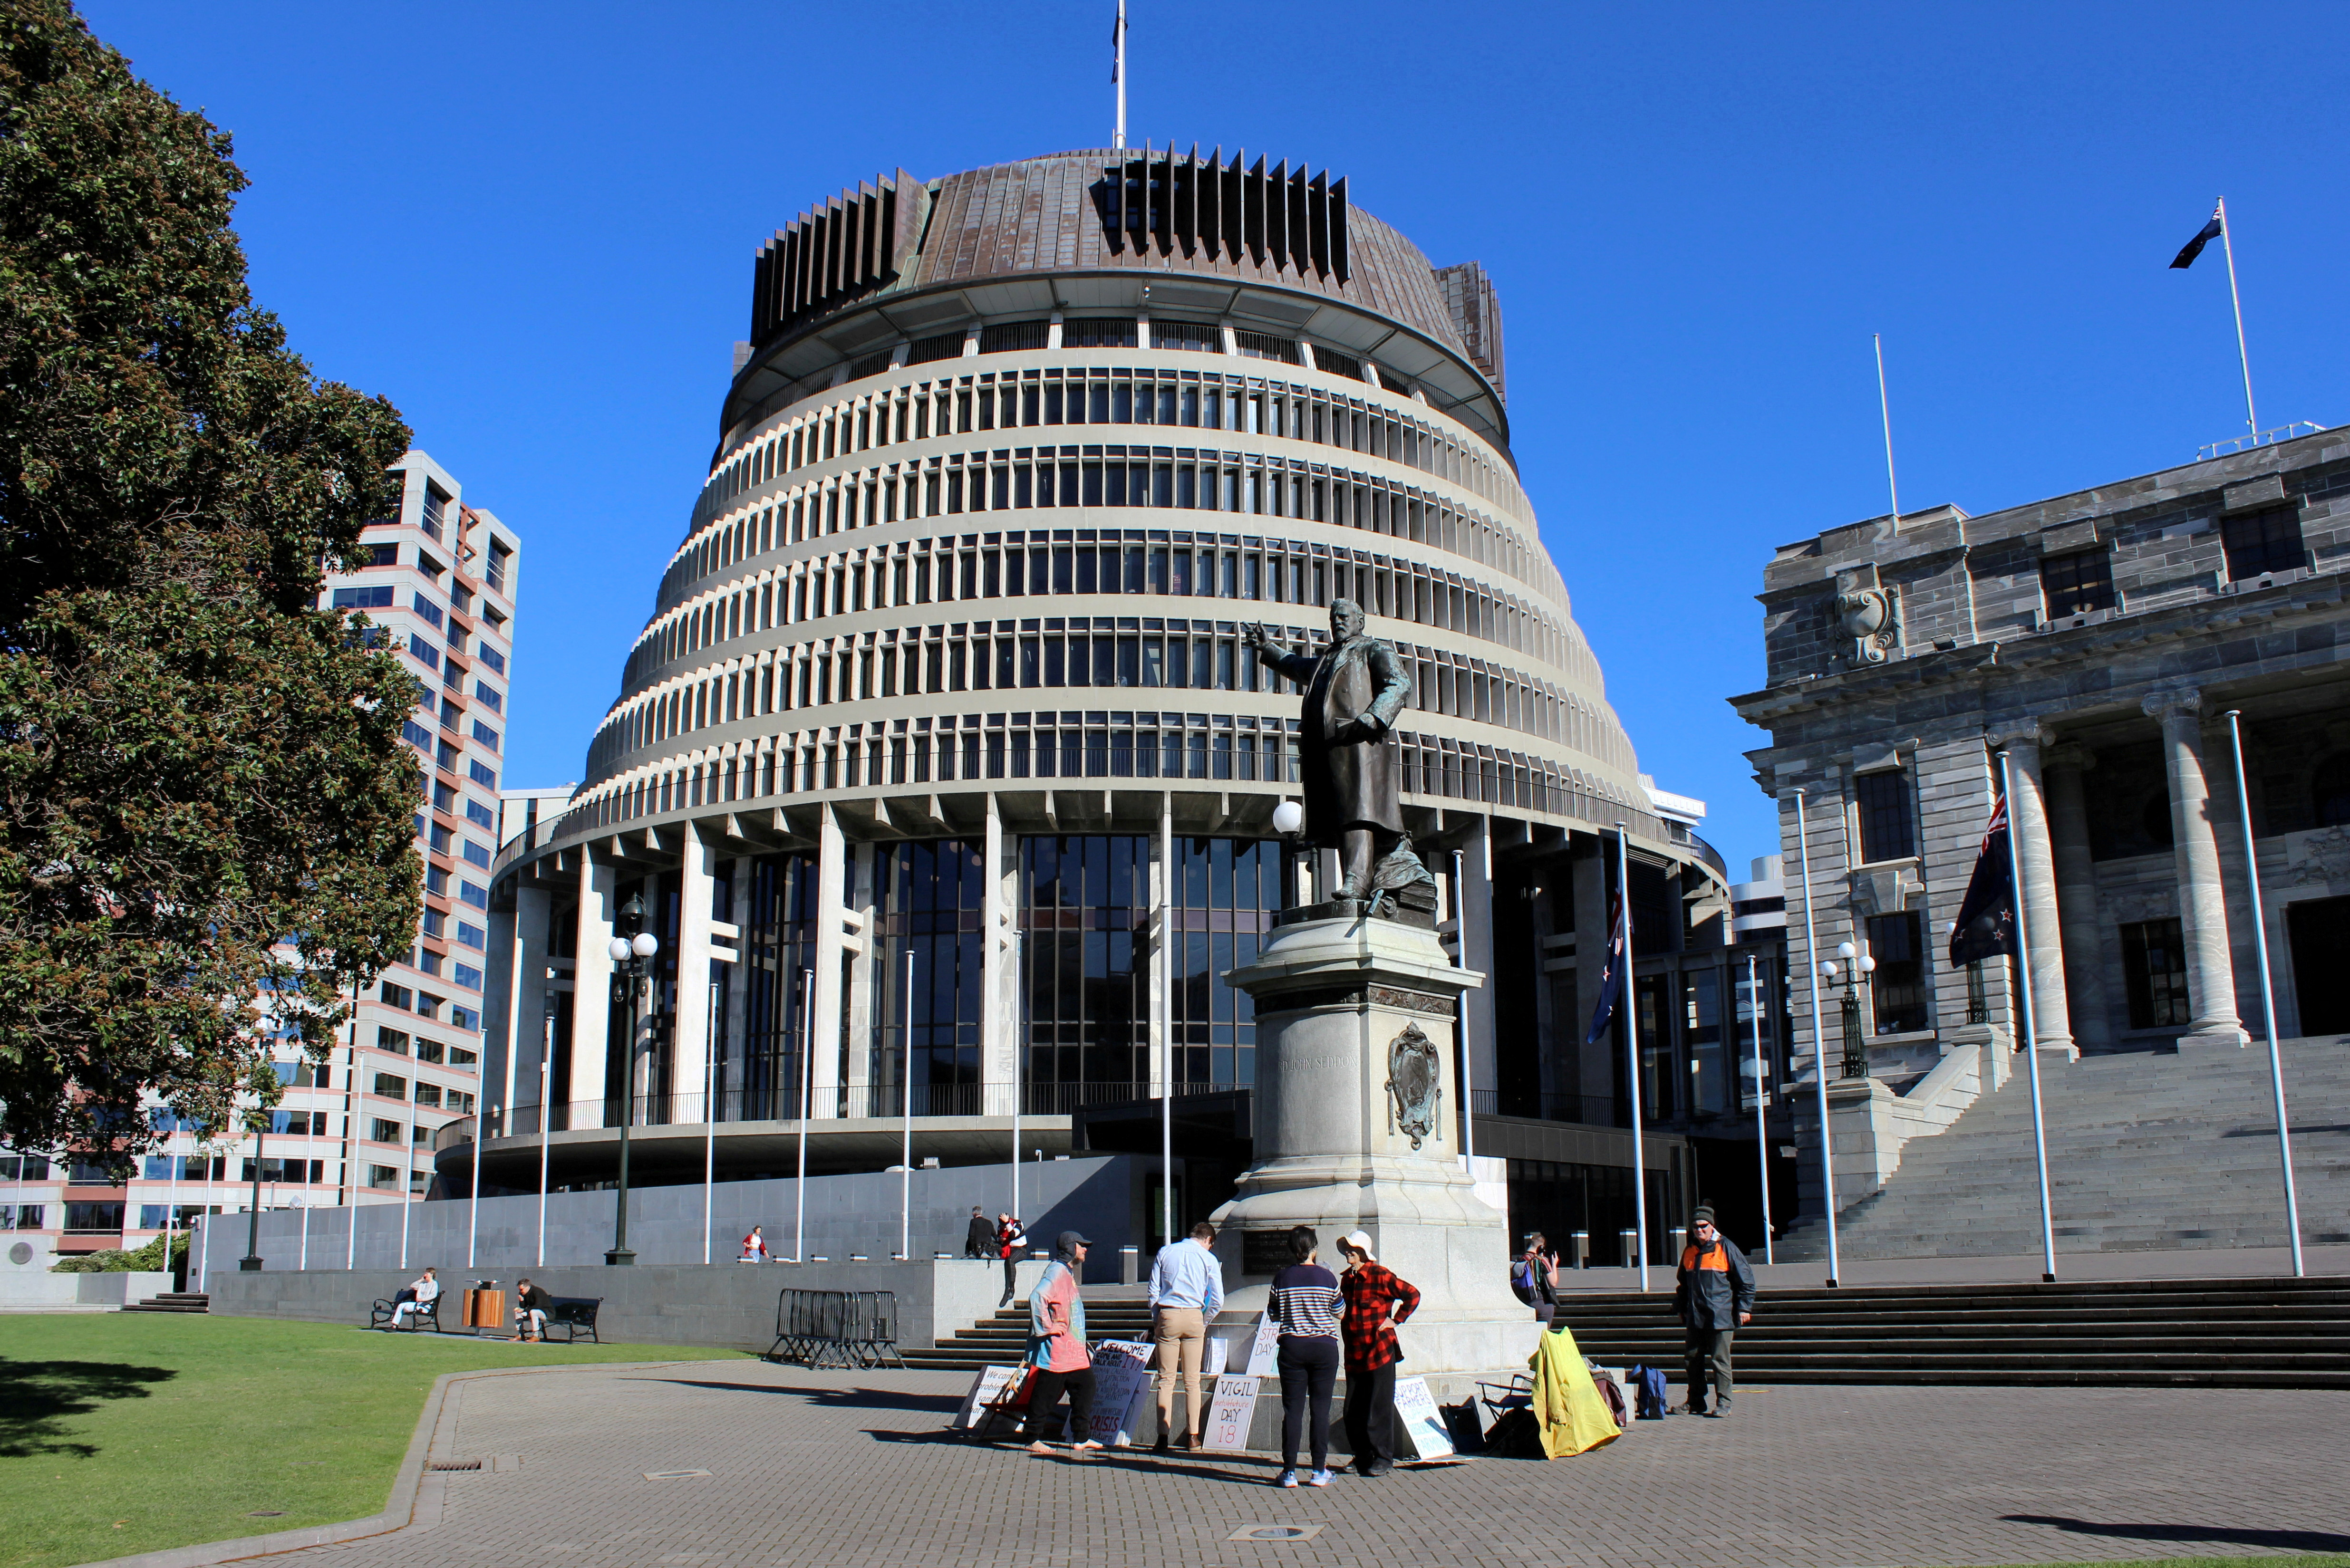 People stand outside the executive wing of the New Zealand Parliament complex, popularly known as 